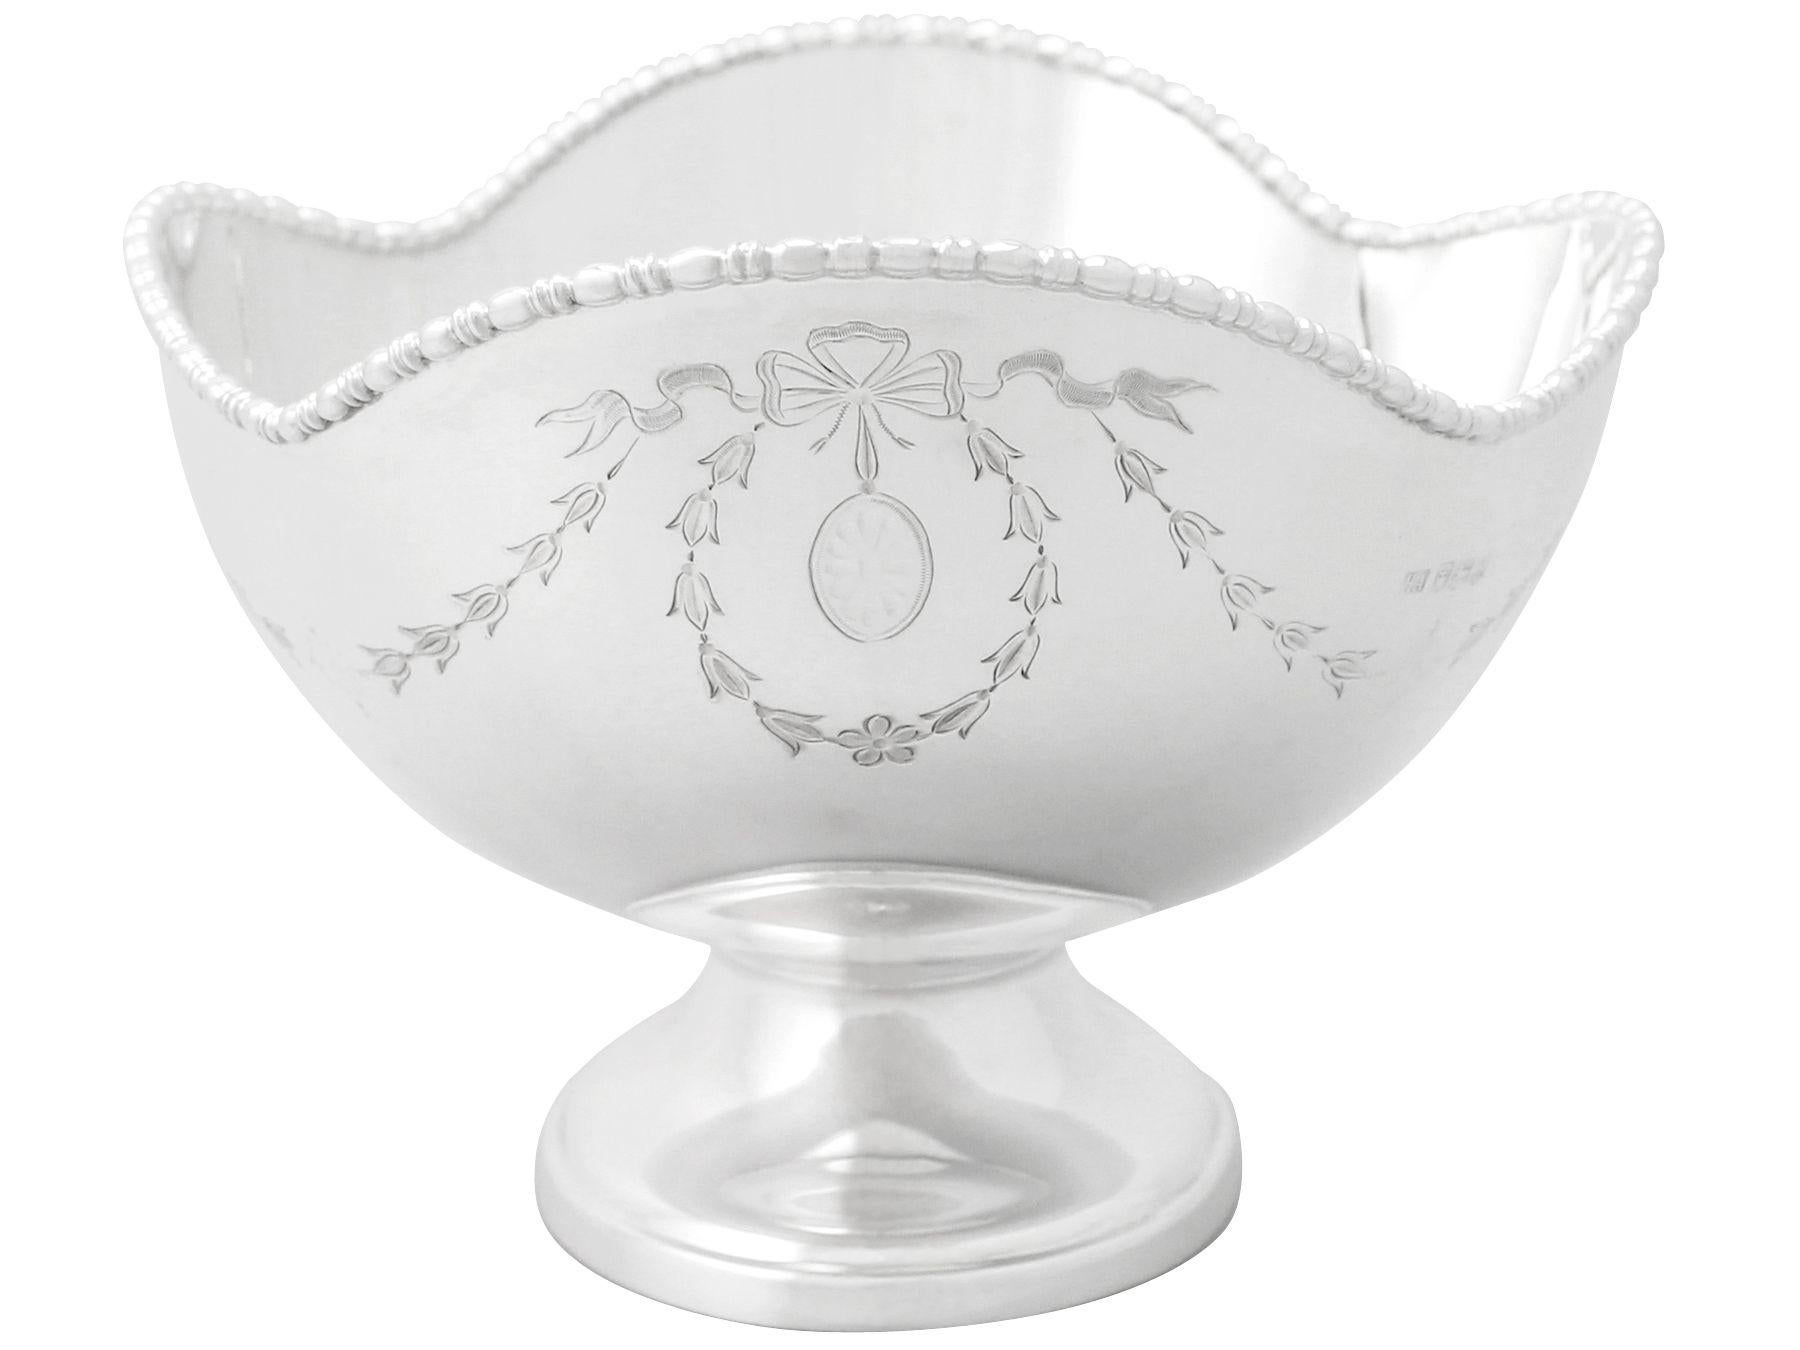 A fine antique George V English sterling silver fruit dish; part of our sterling silver collection.

This antique George V sterling silver fruit dish has a plain rounded oval form onto an oval spreading foot.

The surface of this antique dish is